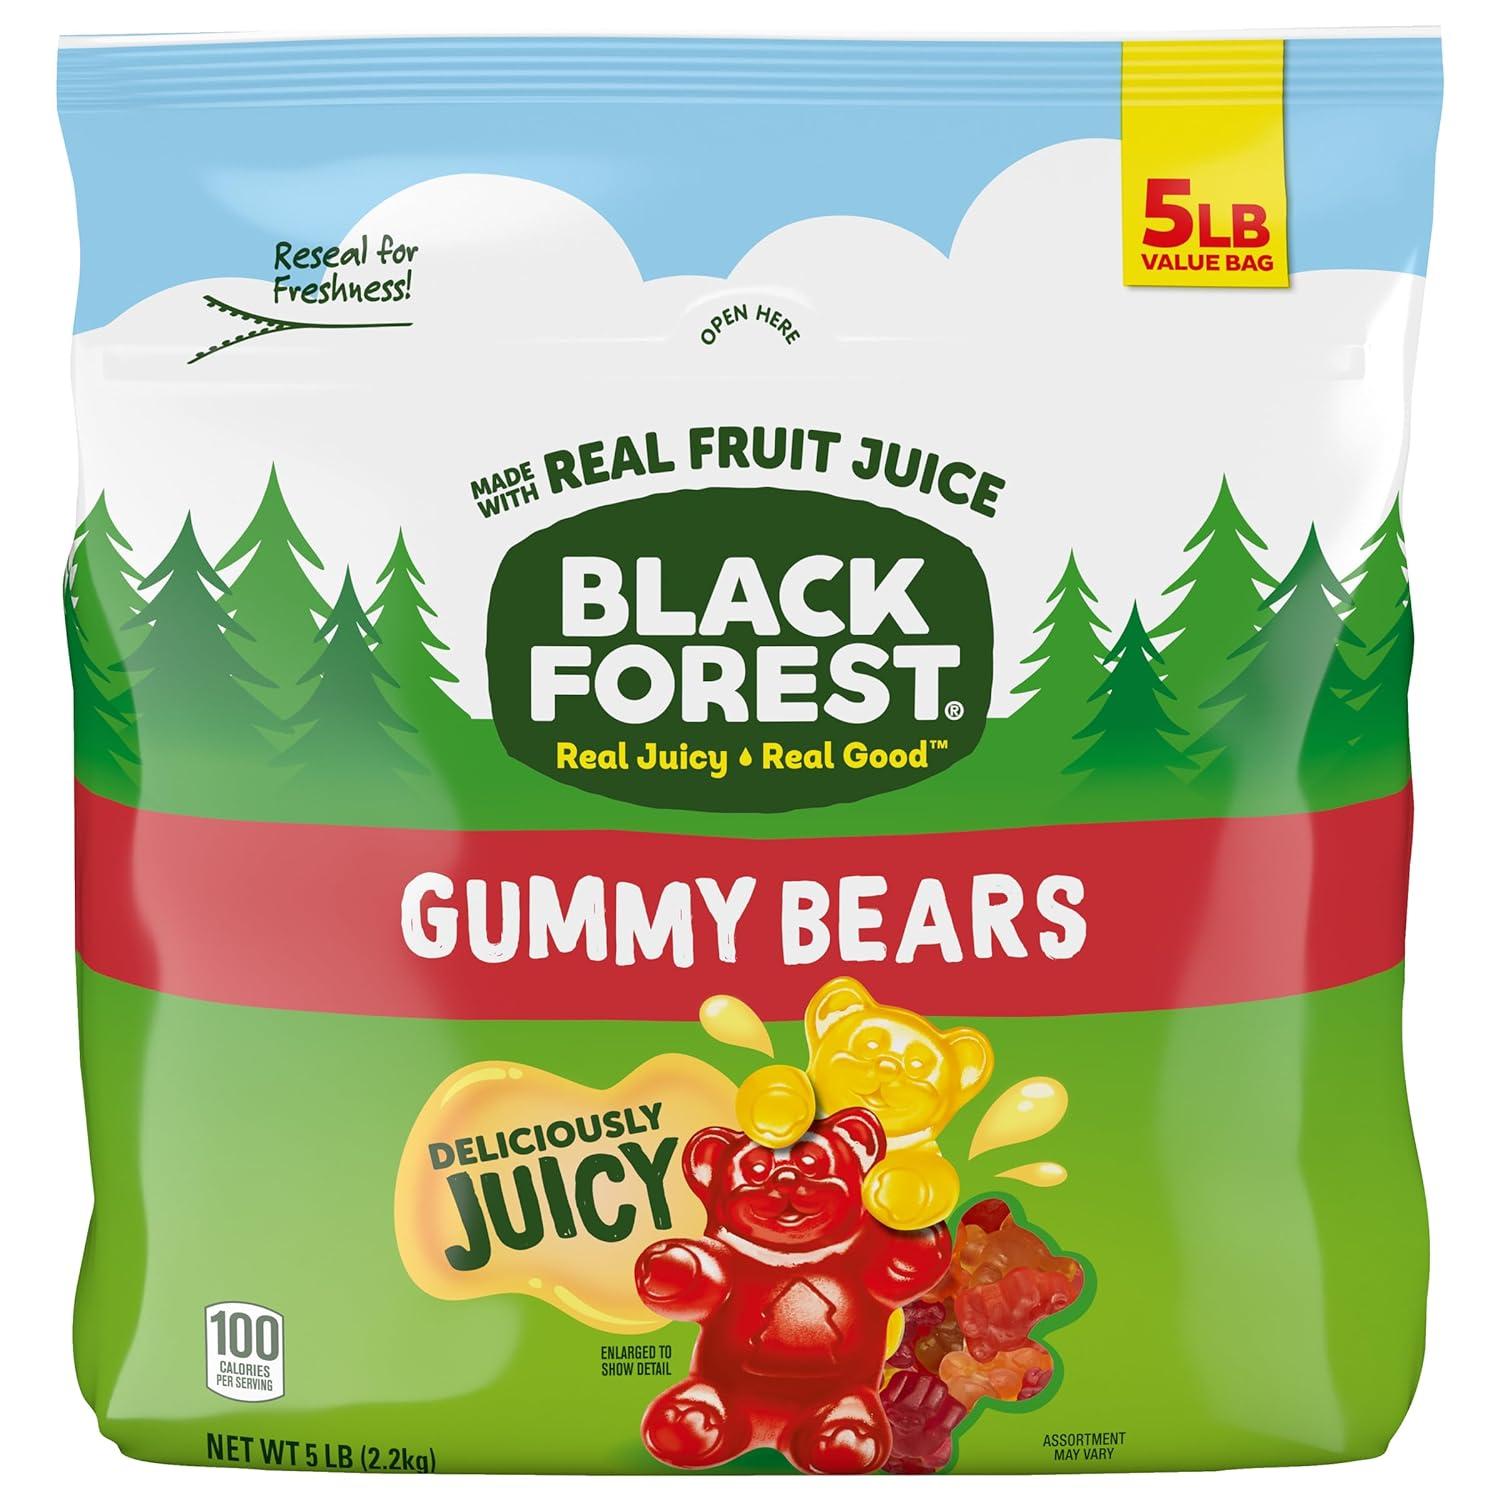 Black Forest Gummy Bears Candy 5Lbs Bag for $10.21